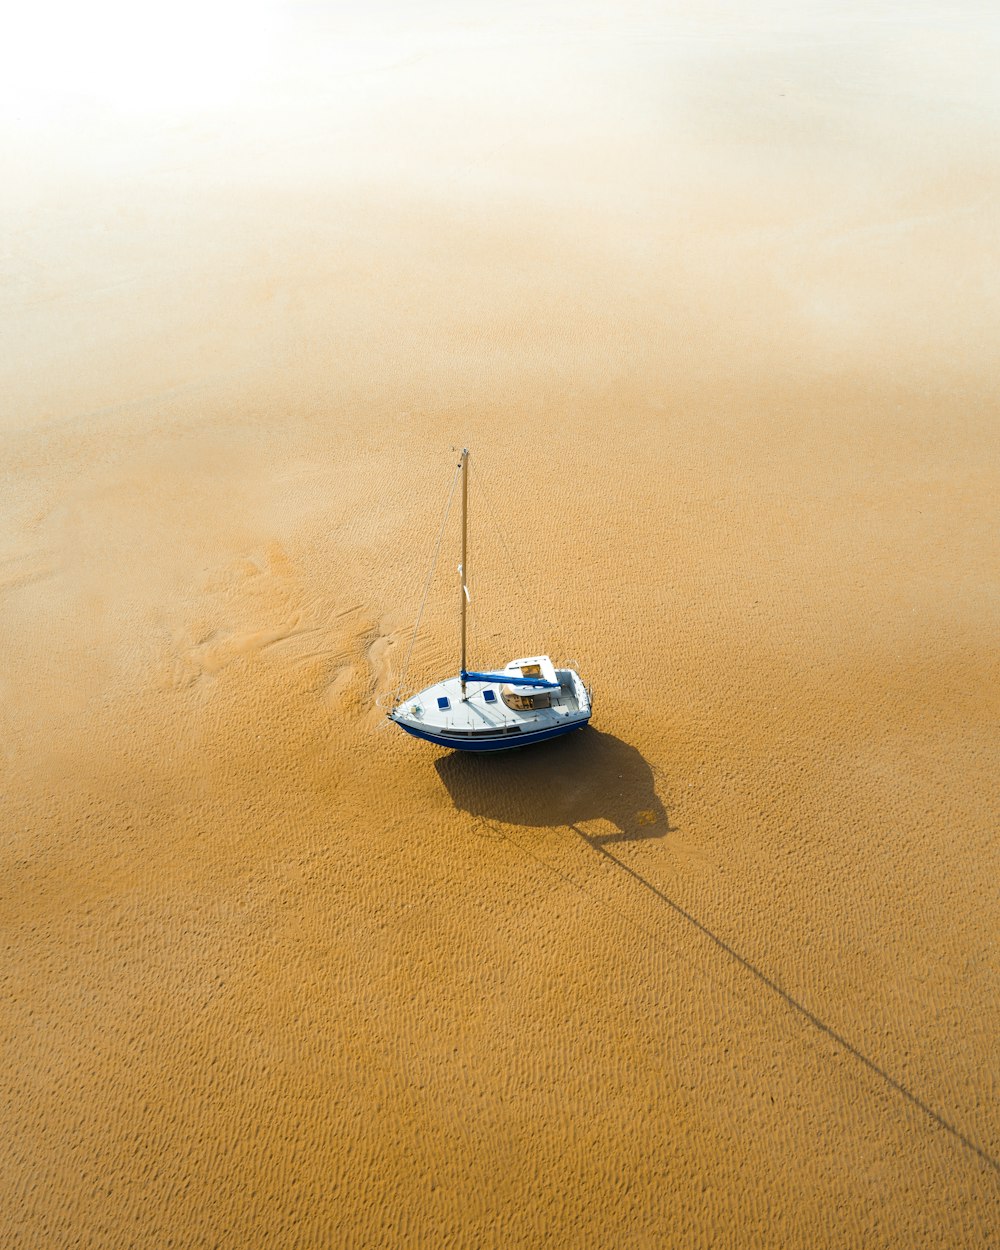 white and blue boat on brown sand during daytime